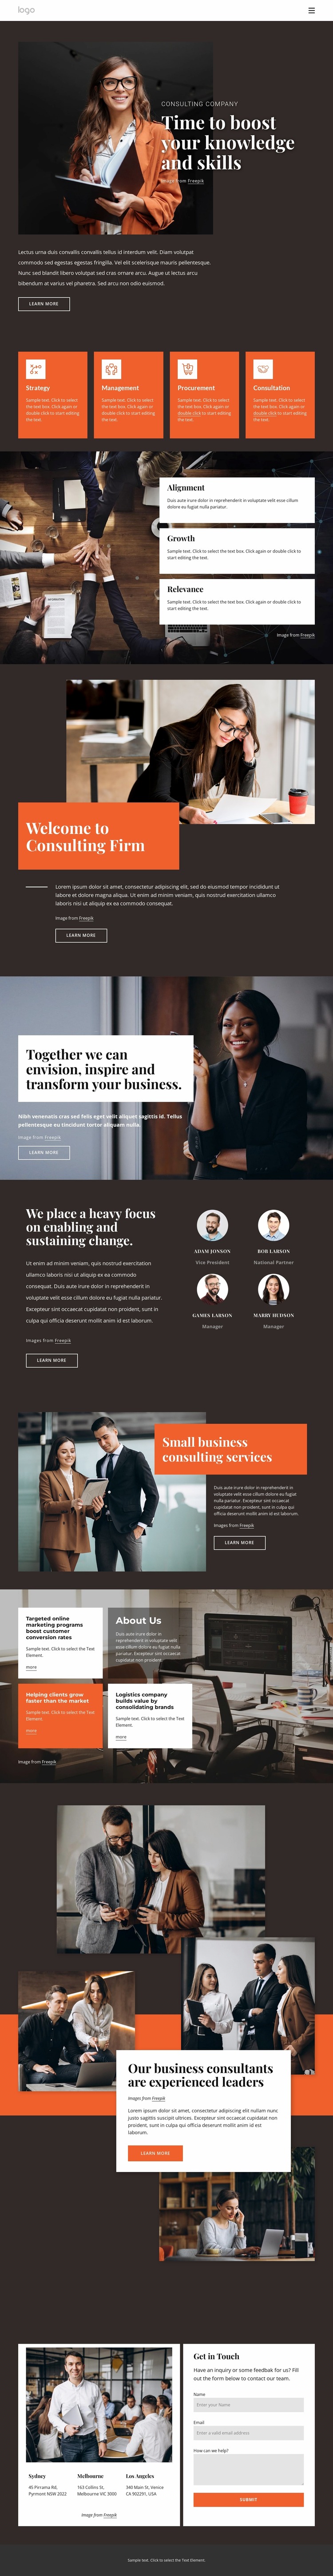 Рlan out your learning journey WordPress Website Builder